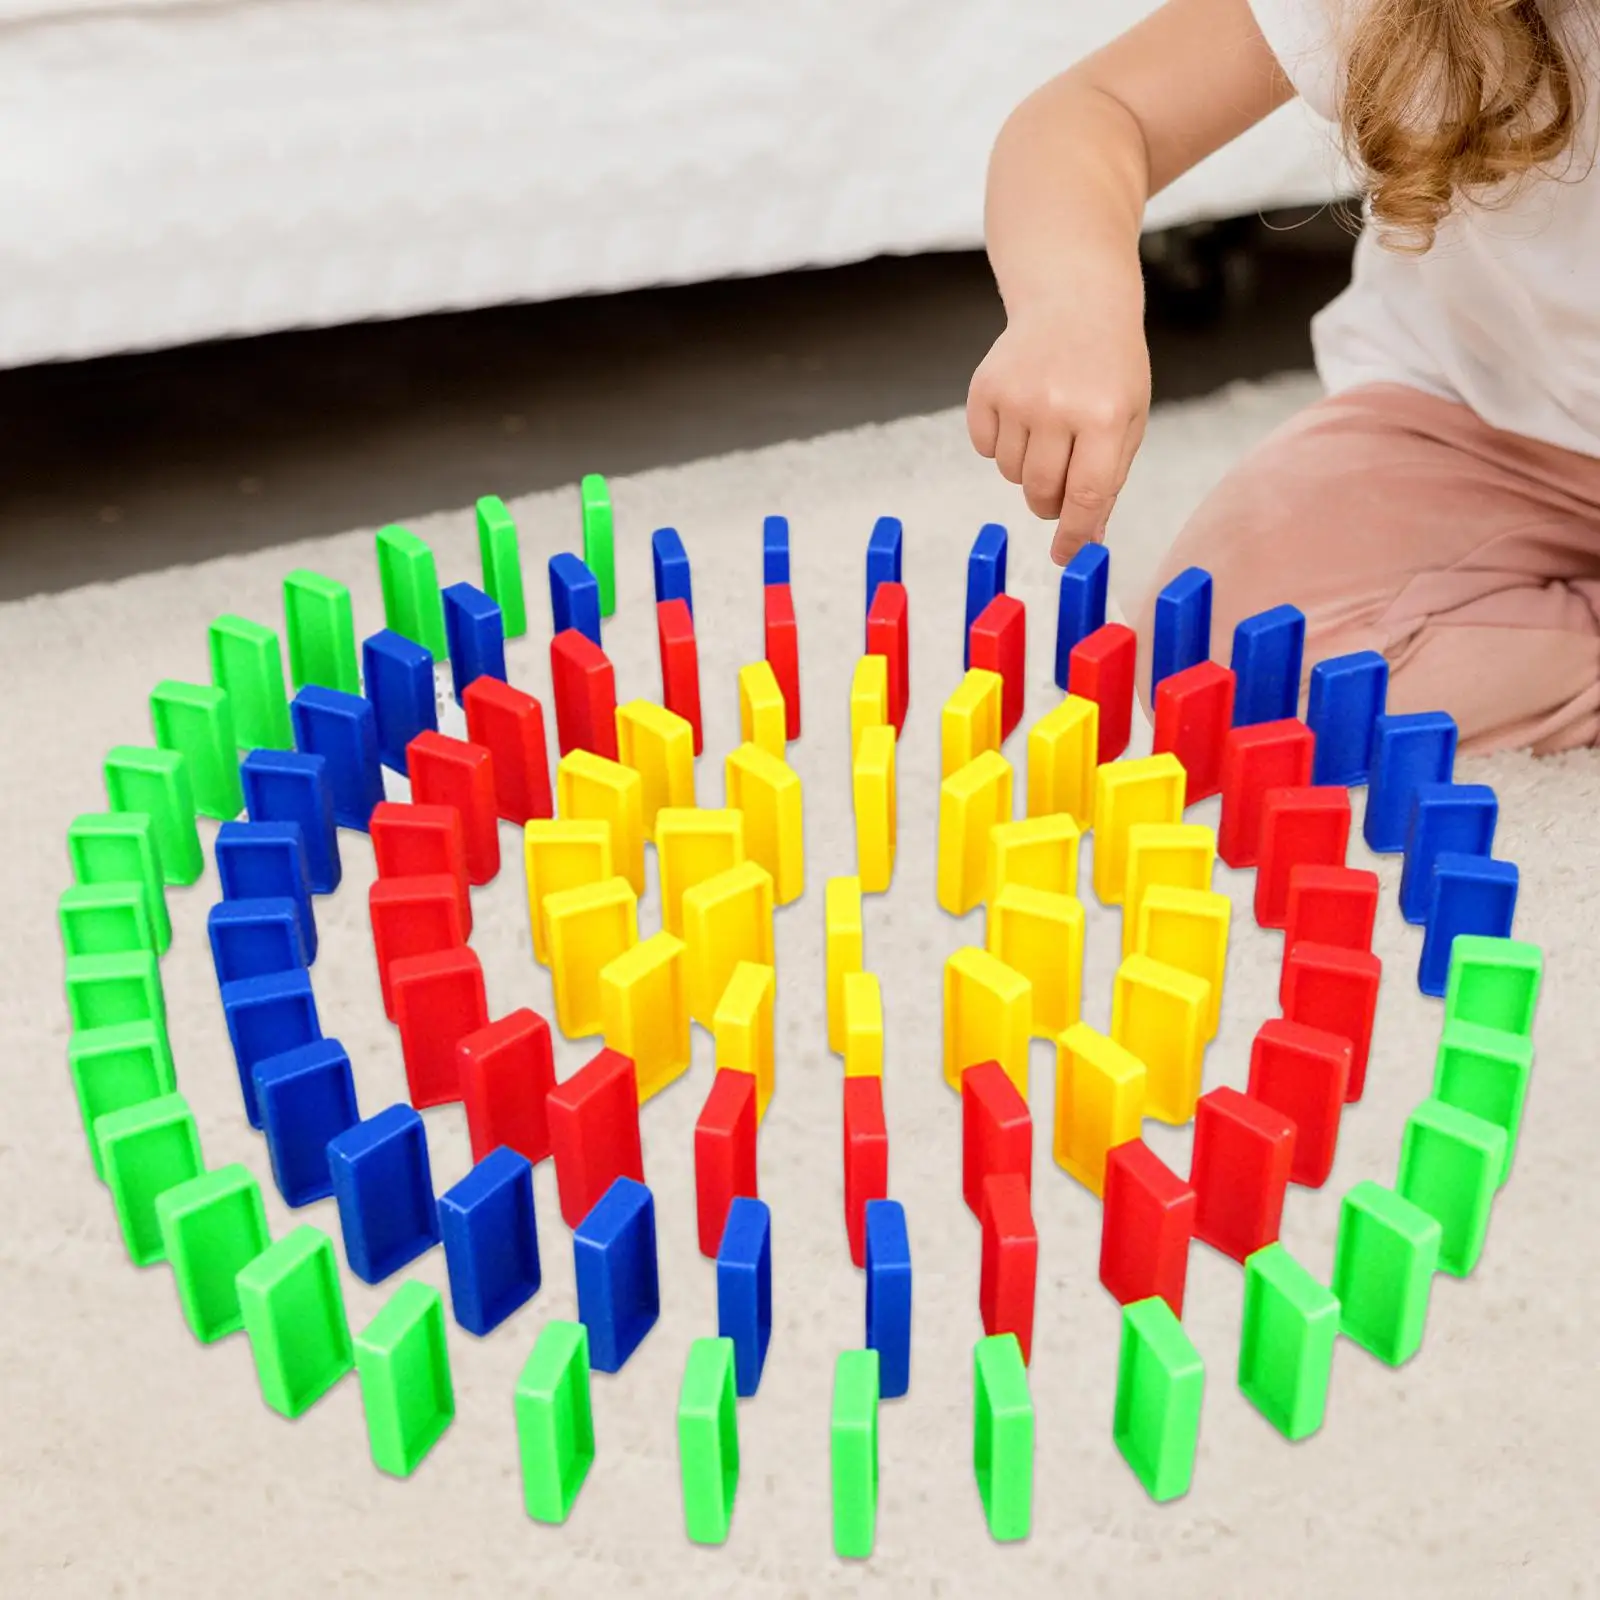 100x Dominoes Train Blocks Set Game Stacking Toy Building Educational Play Toy for Toddler Children Kids Birthday Gifts